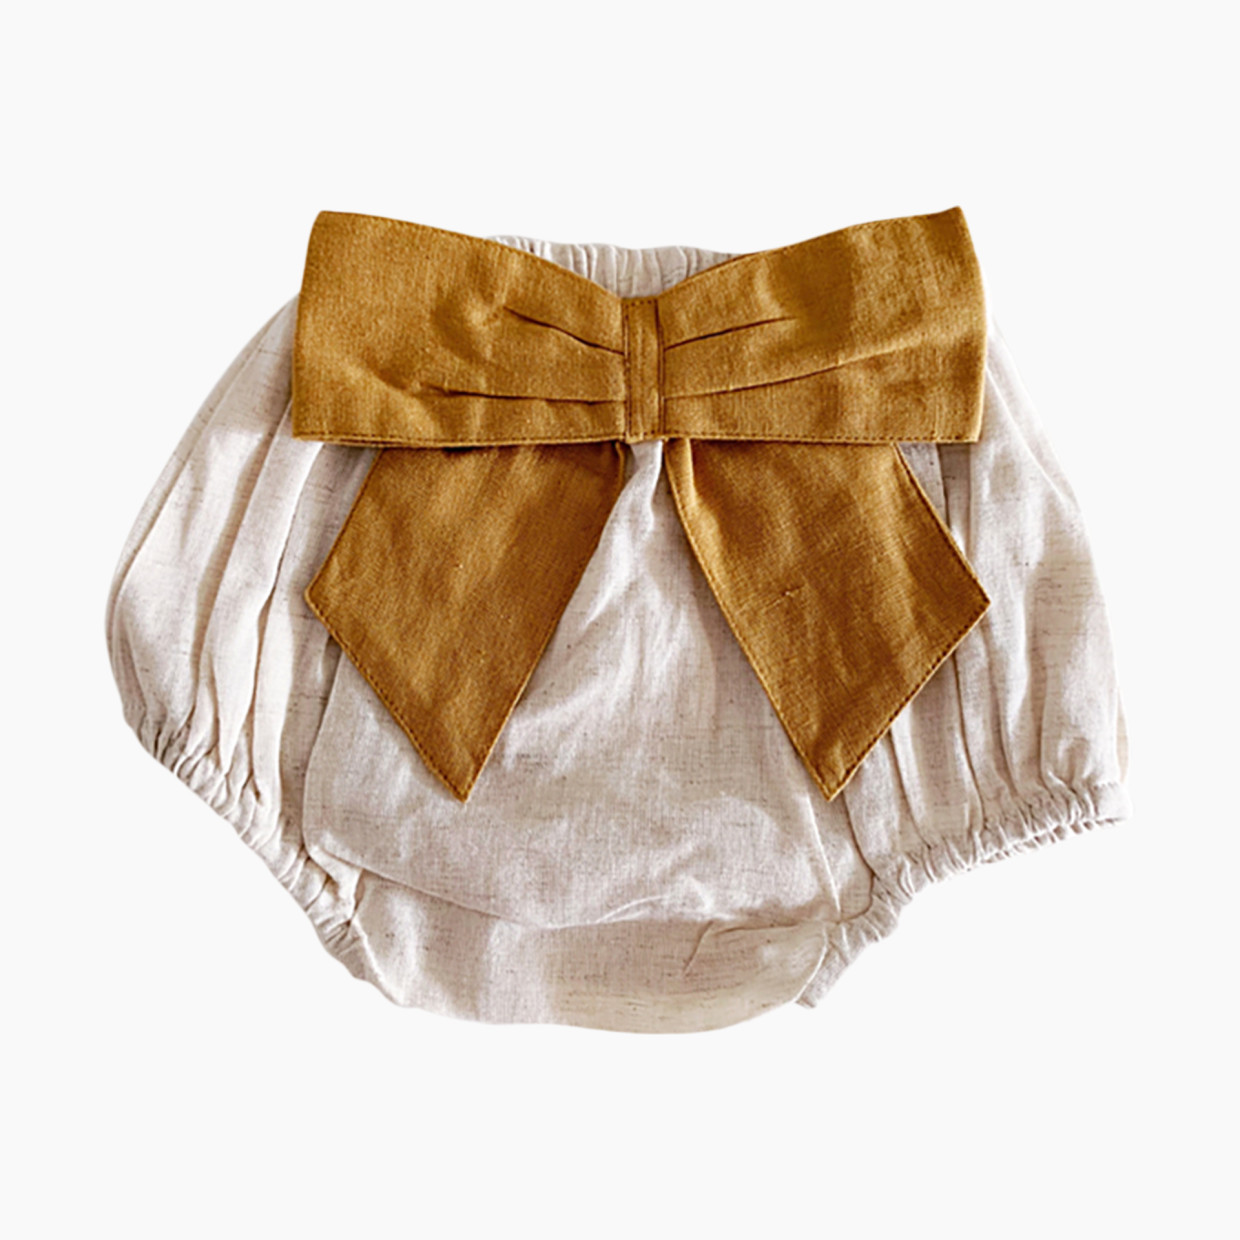 Sassy Minor Diaper Cover with Bow - Camel, 3-6 Months.